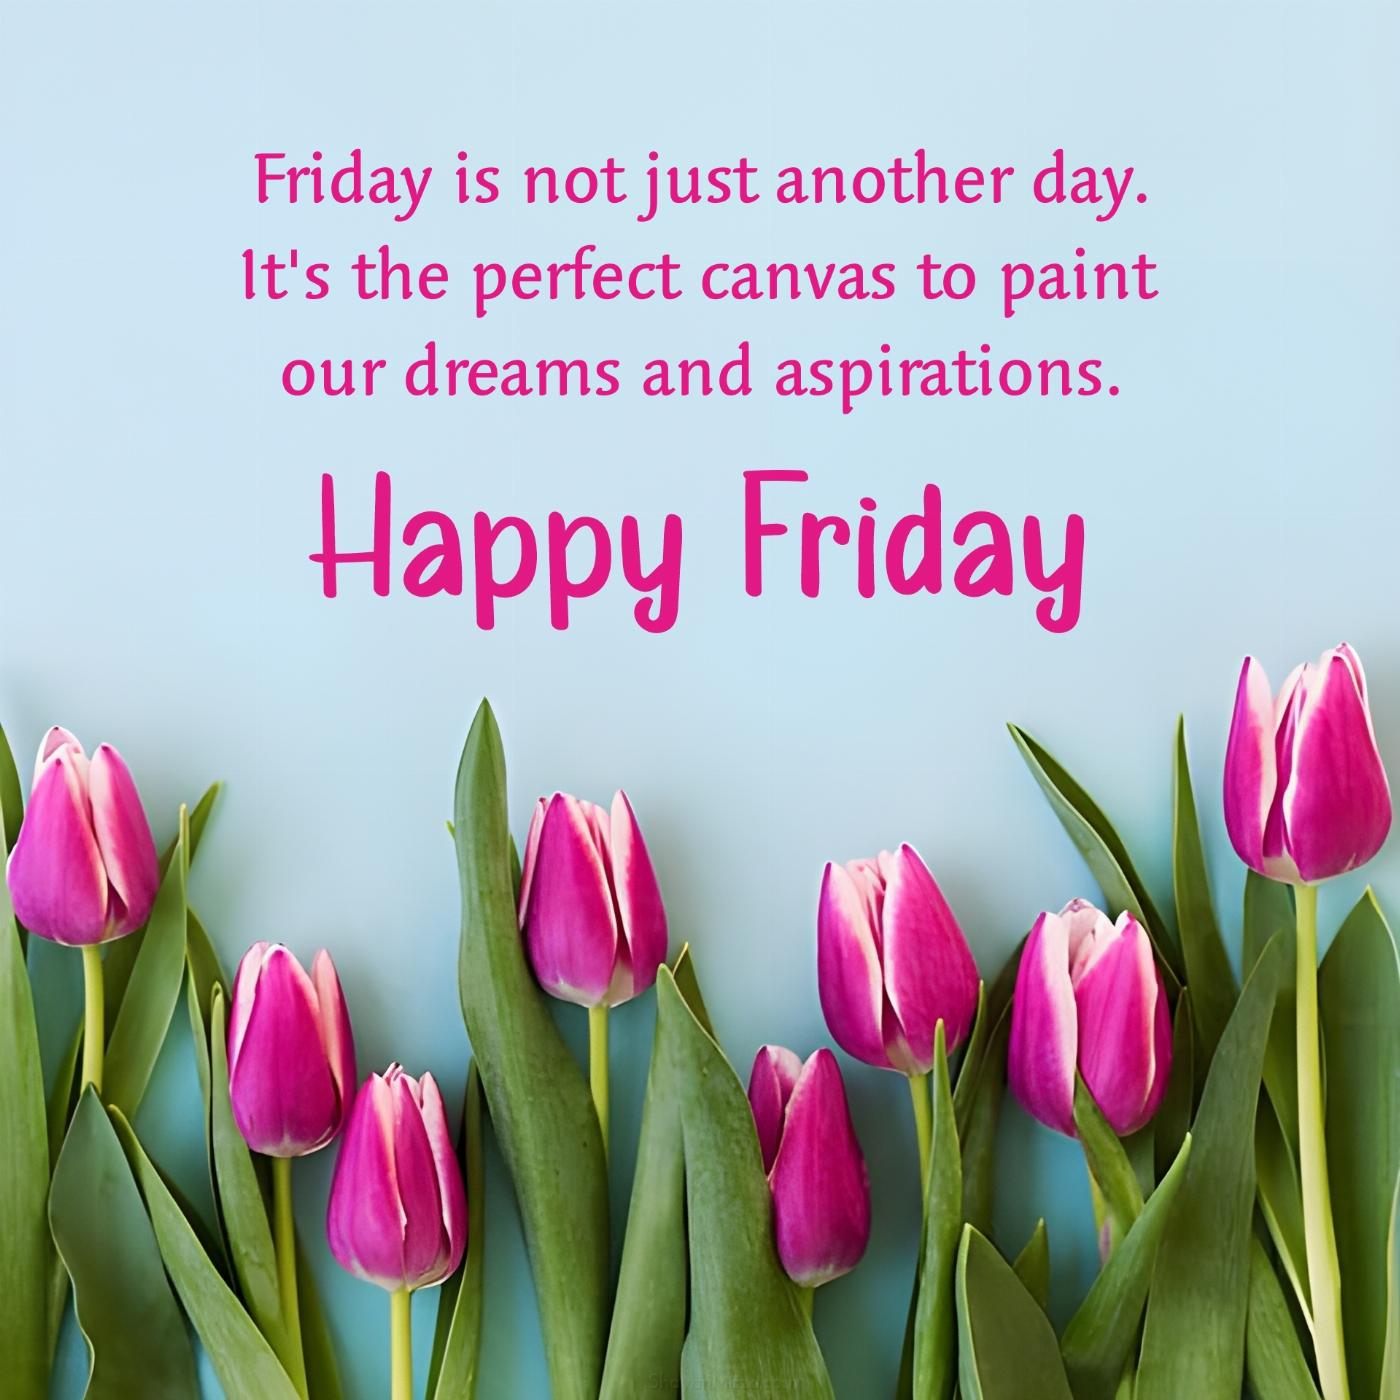 Friday is not just another day It's the perfect canvas to paint our dreams